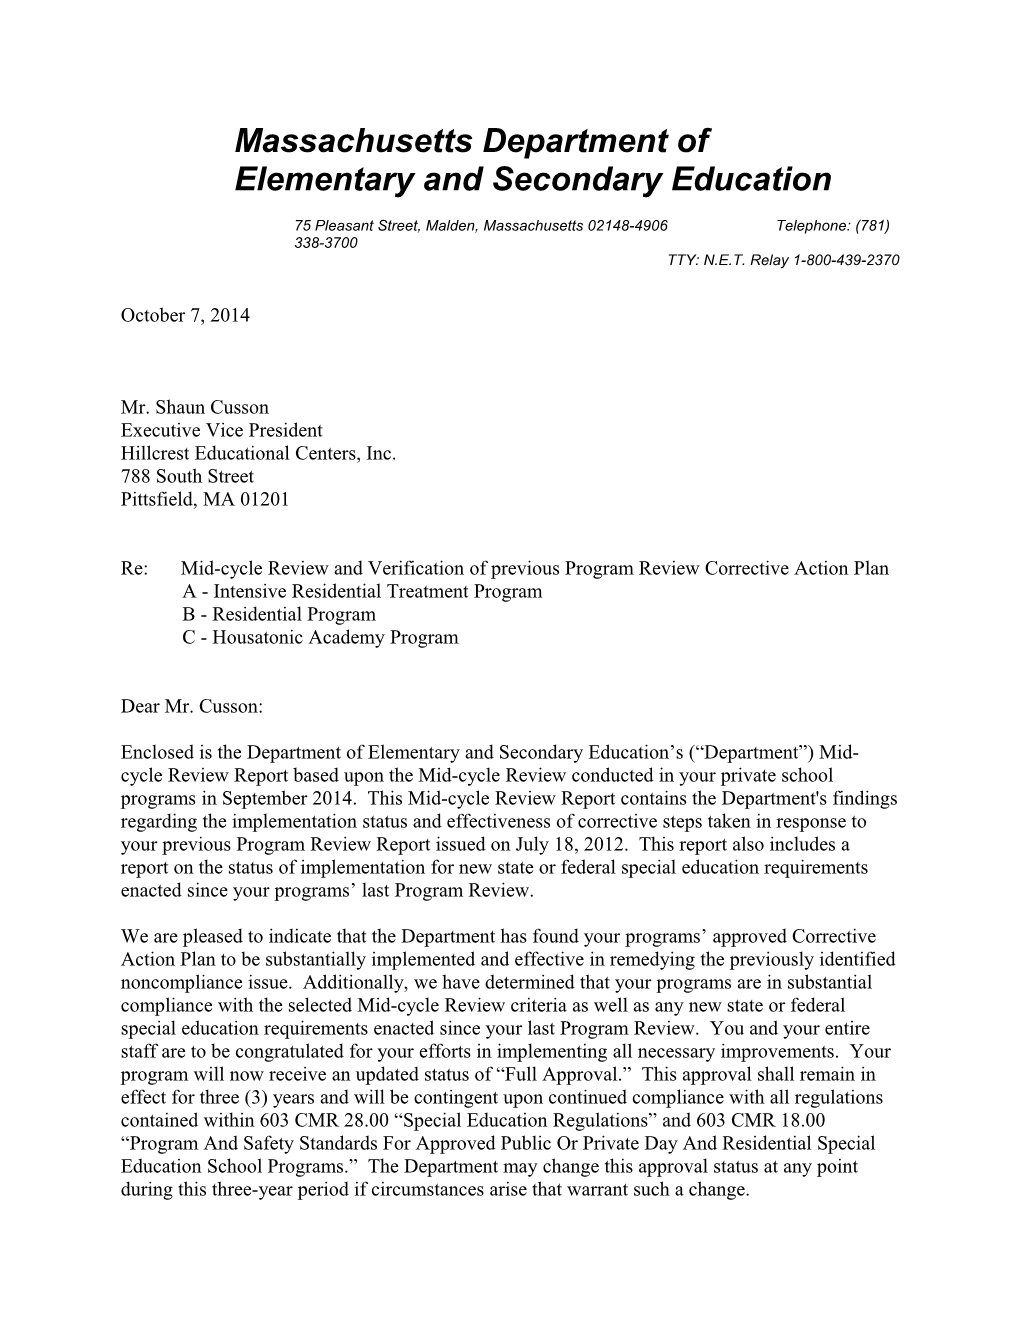 Hillcrest Educational Centers, Inc. Mid-Cycle Report 2015